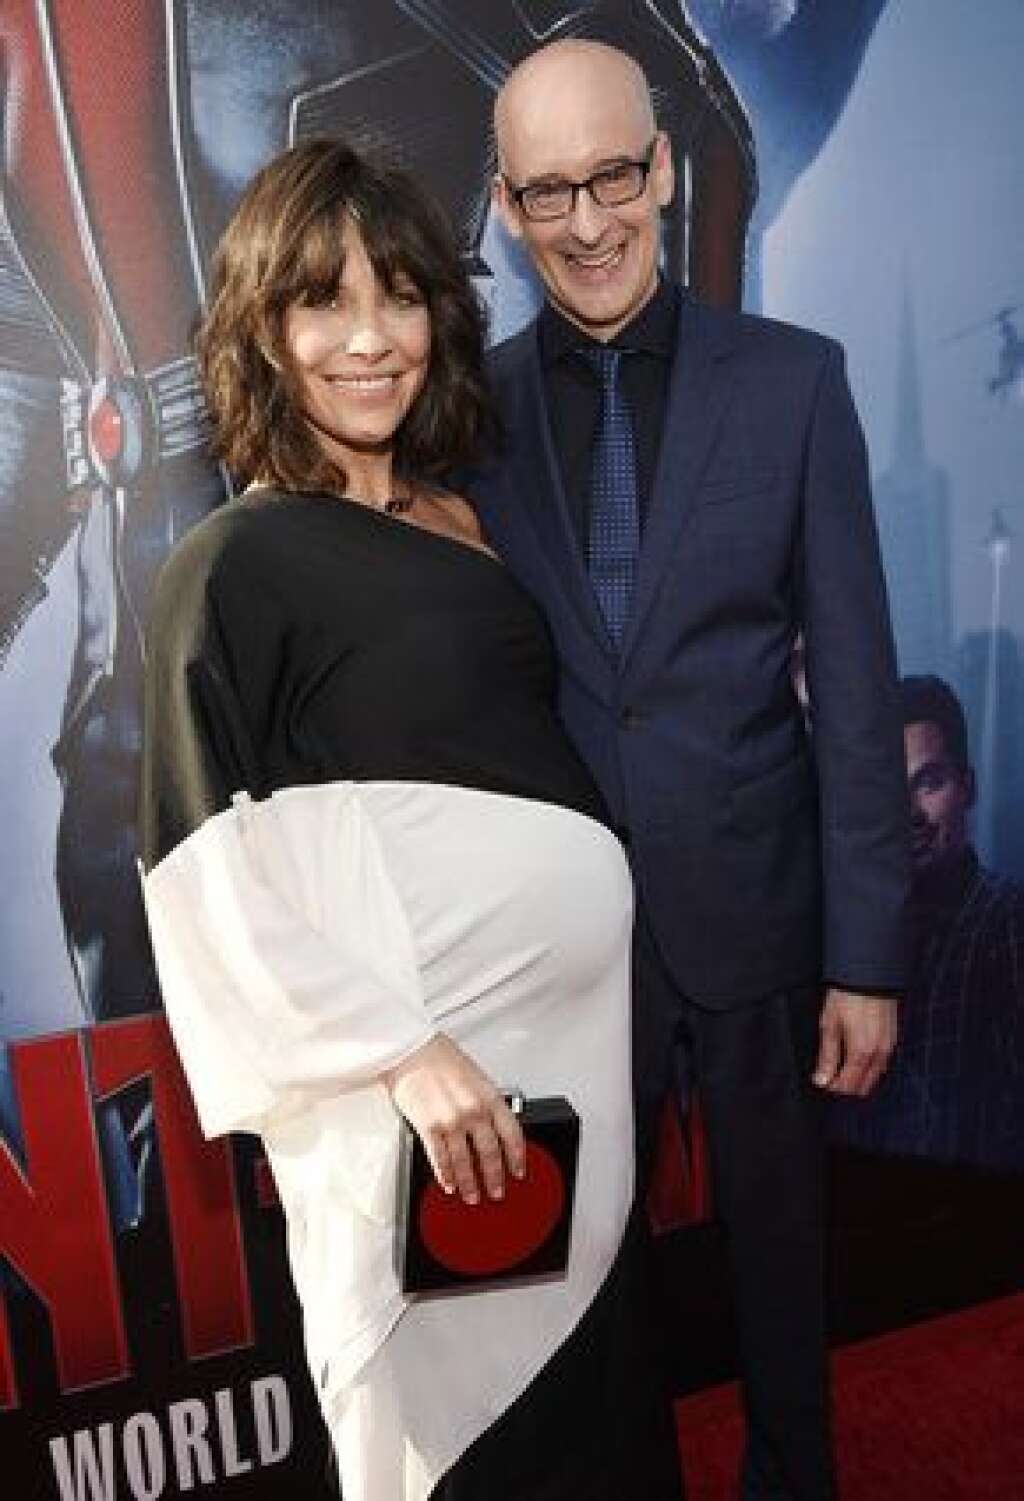 LA Premiere of "Ant-Man" - Red Carpet - Evangeline Lilly, left, a cast member in "Ant-Man," poses with director Peyton Reed at the premiere of the film at The Dolby Theatre on Monday, June 29, 2015, in Los Angeles. (Photo by Chris Pizzello/Invision/AP)